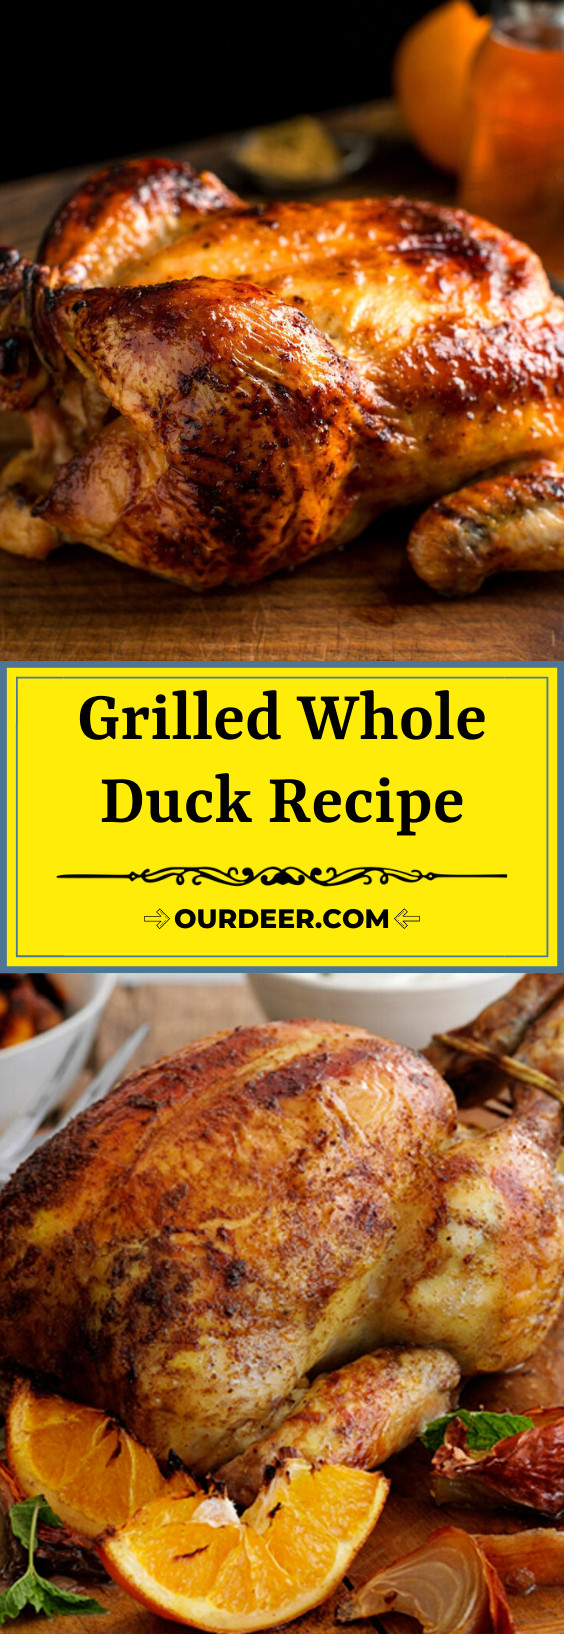 Grilled Wild Duck Recipes
 Grilled Whole Duck Recipe